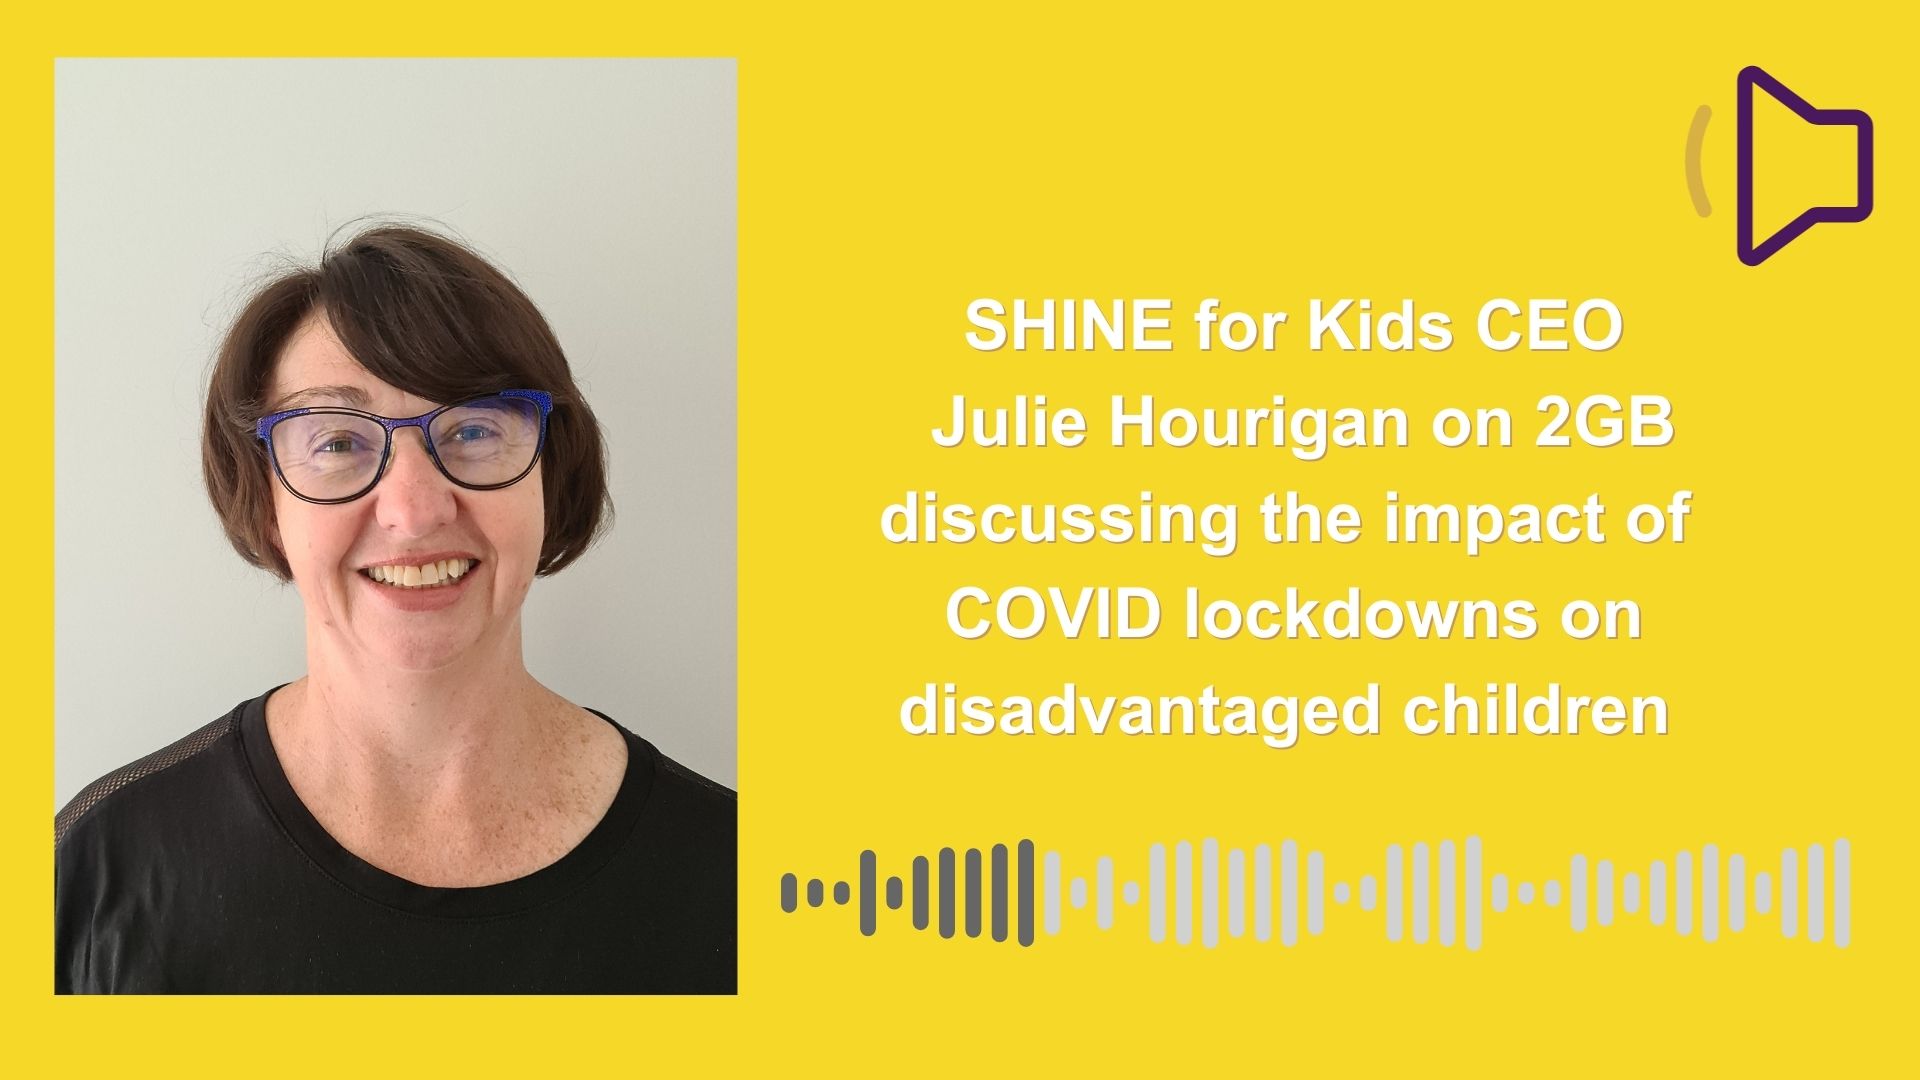 SHINE for Kids CEO on 2GB